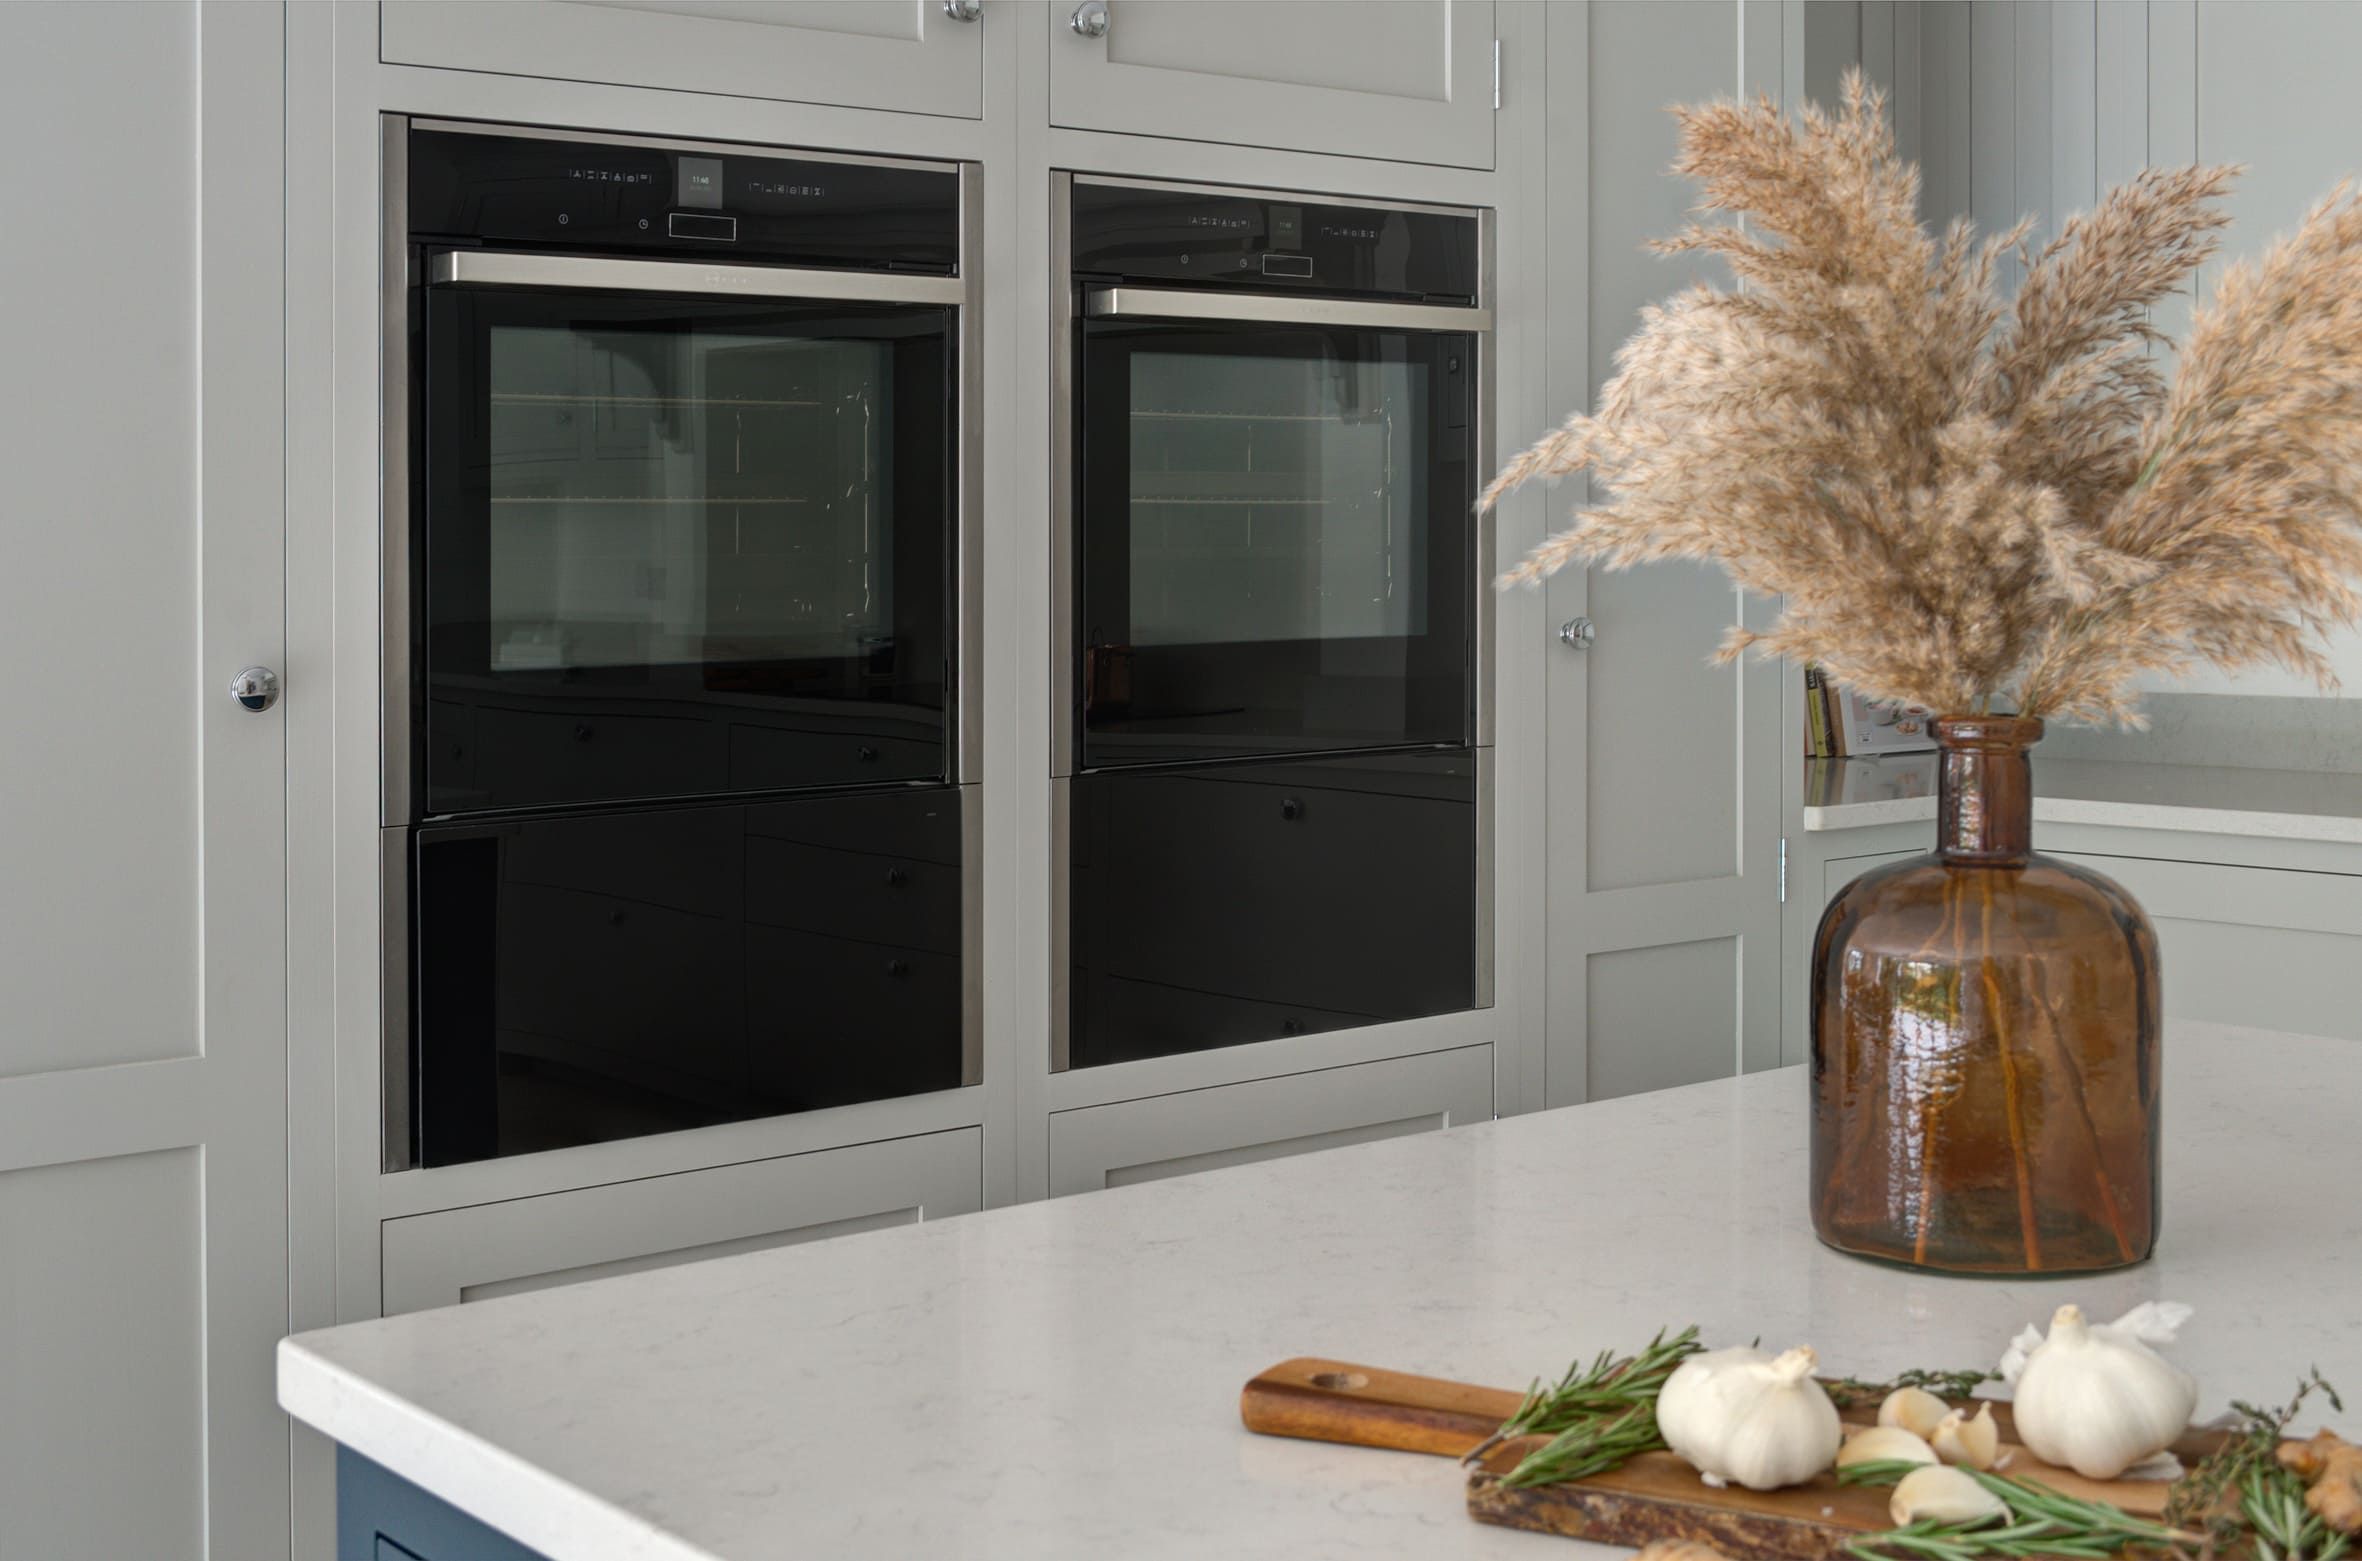 2 large, integrated ovens, surrounded by white cabinets, showing ample storage space.